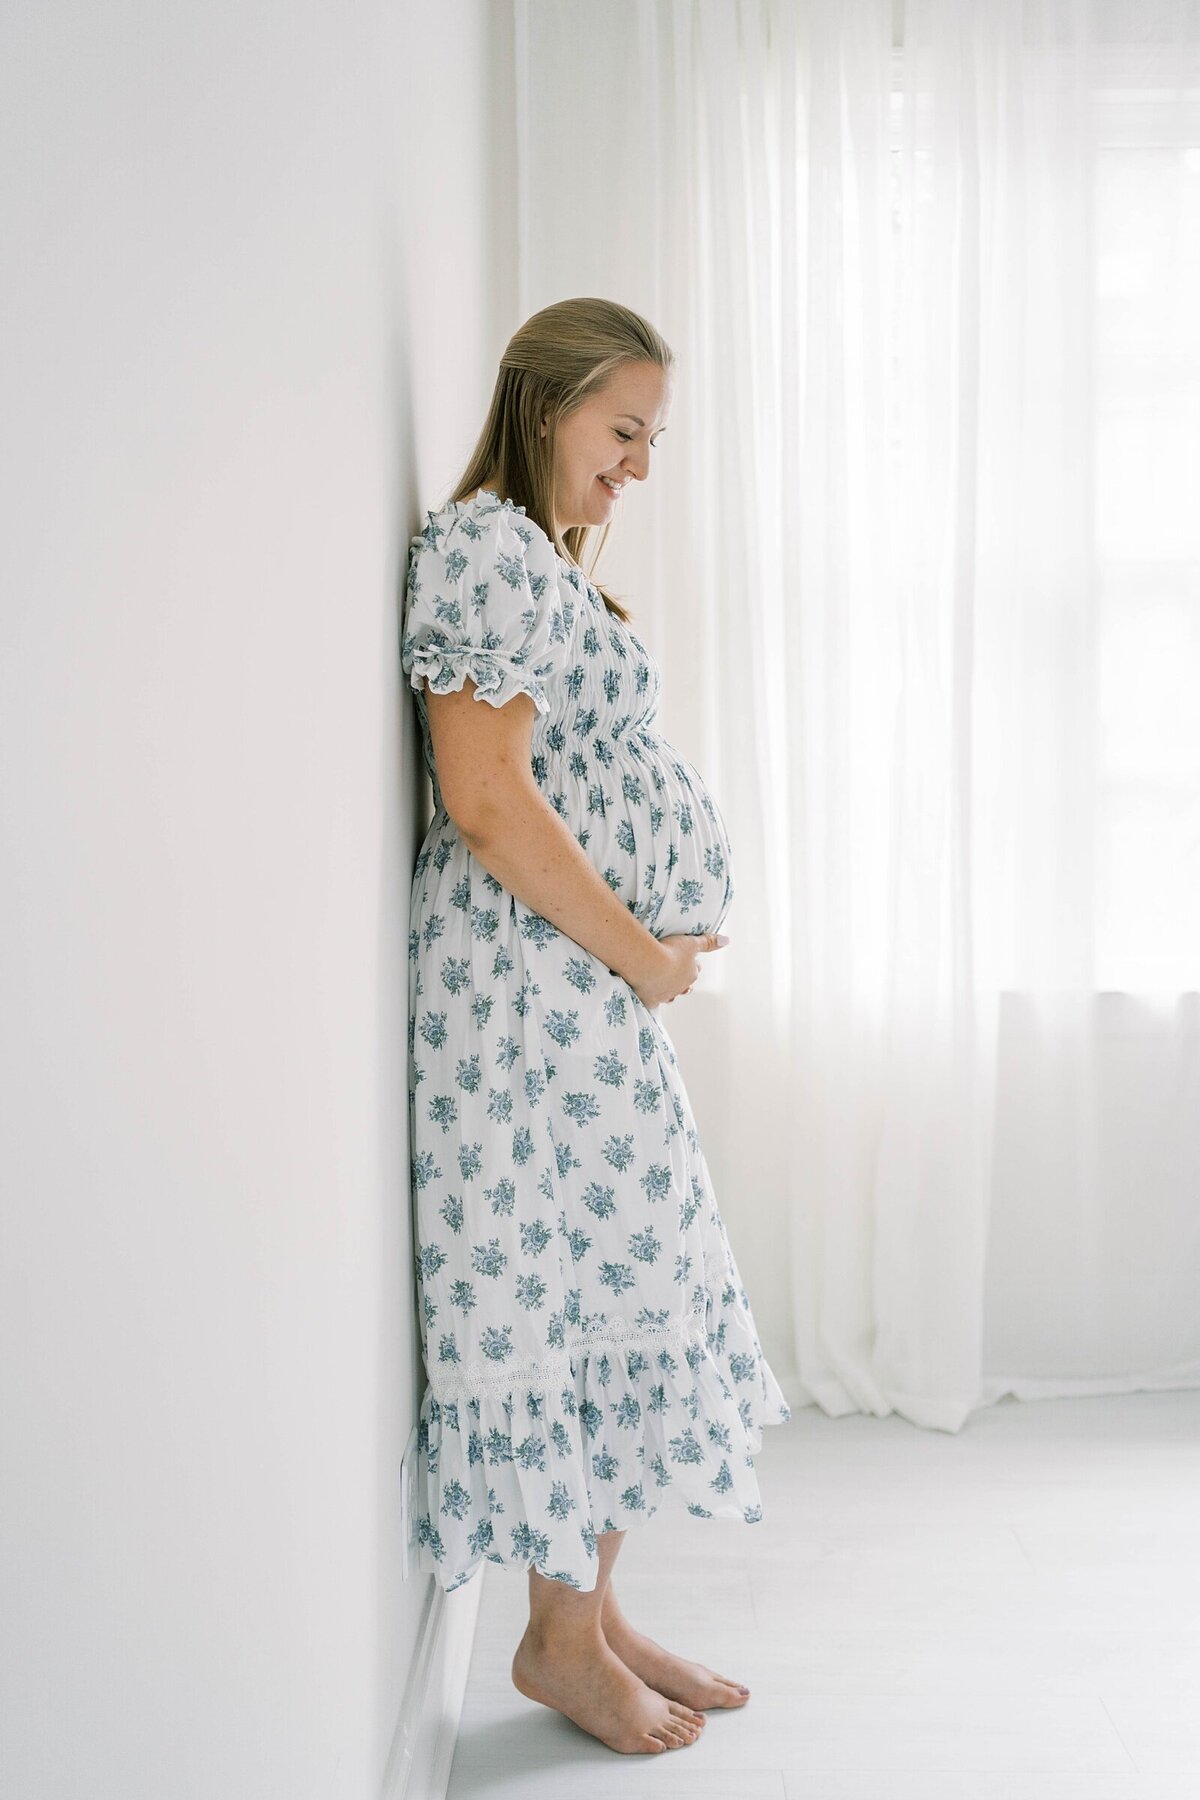 Roswell Maternity Photographer_0090